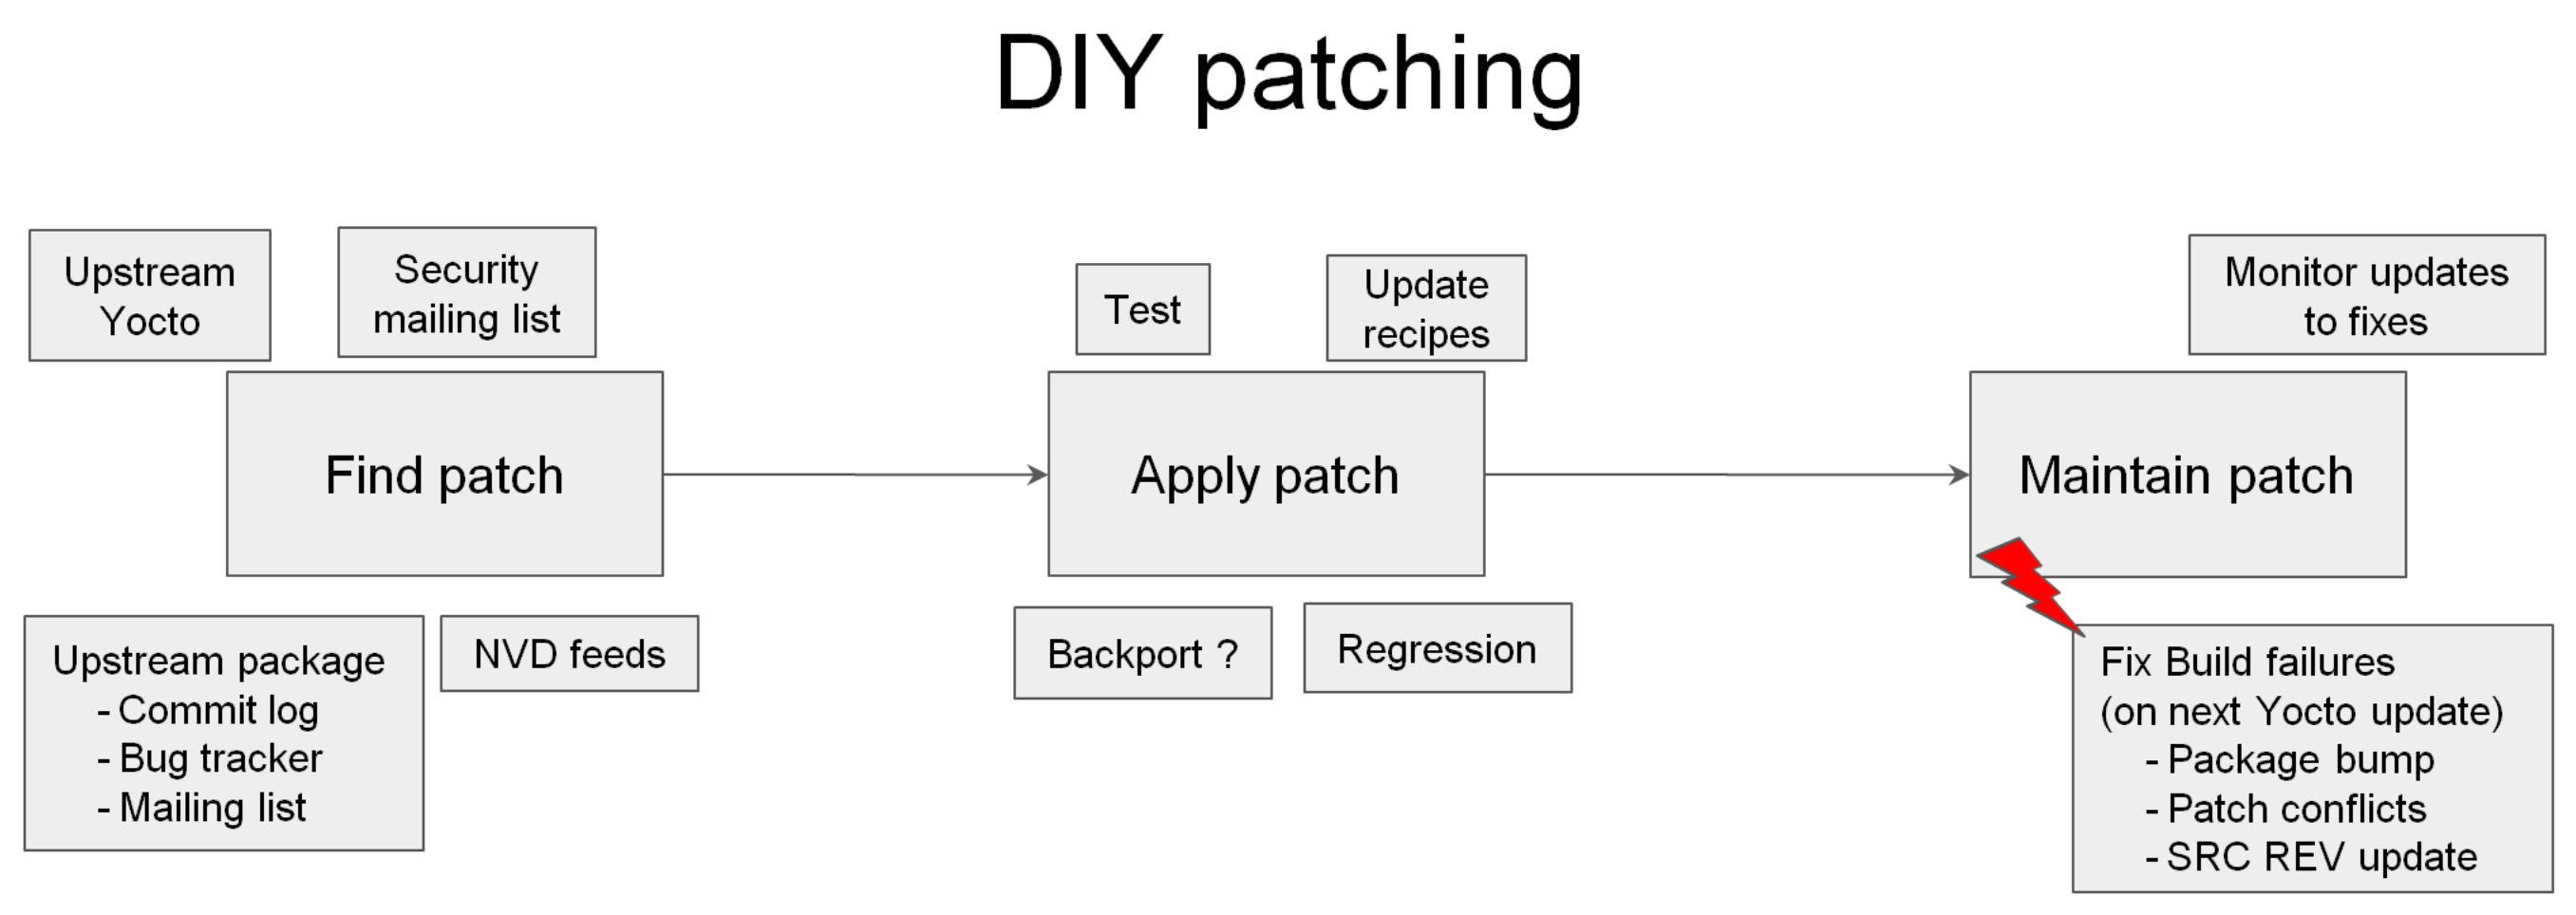 DIY security vulnerability patching